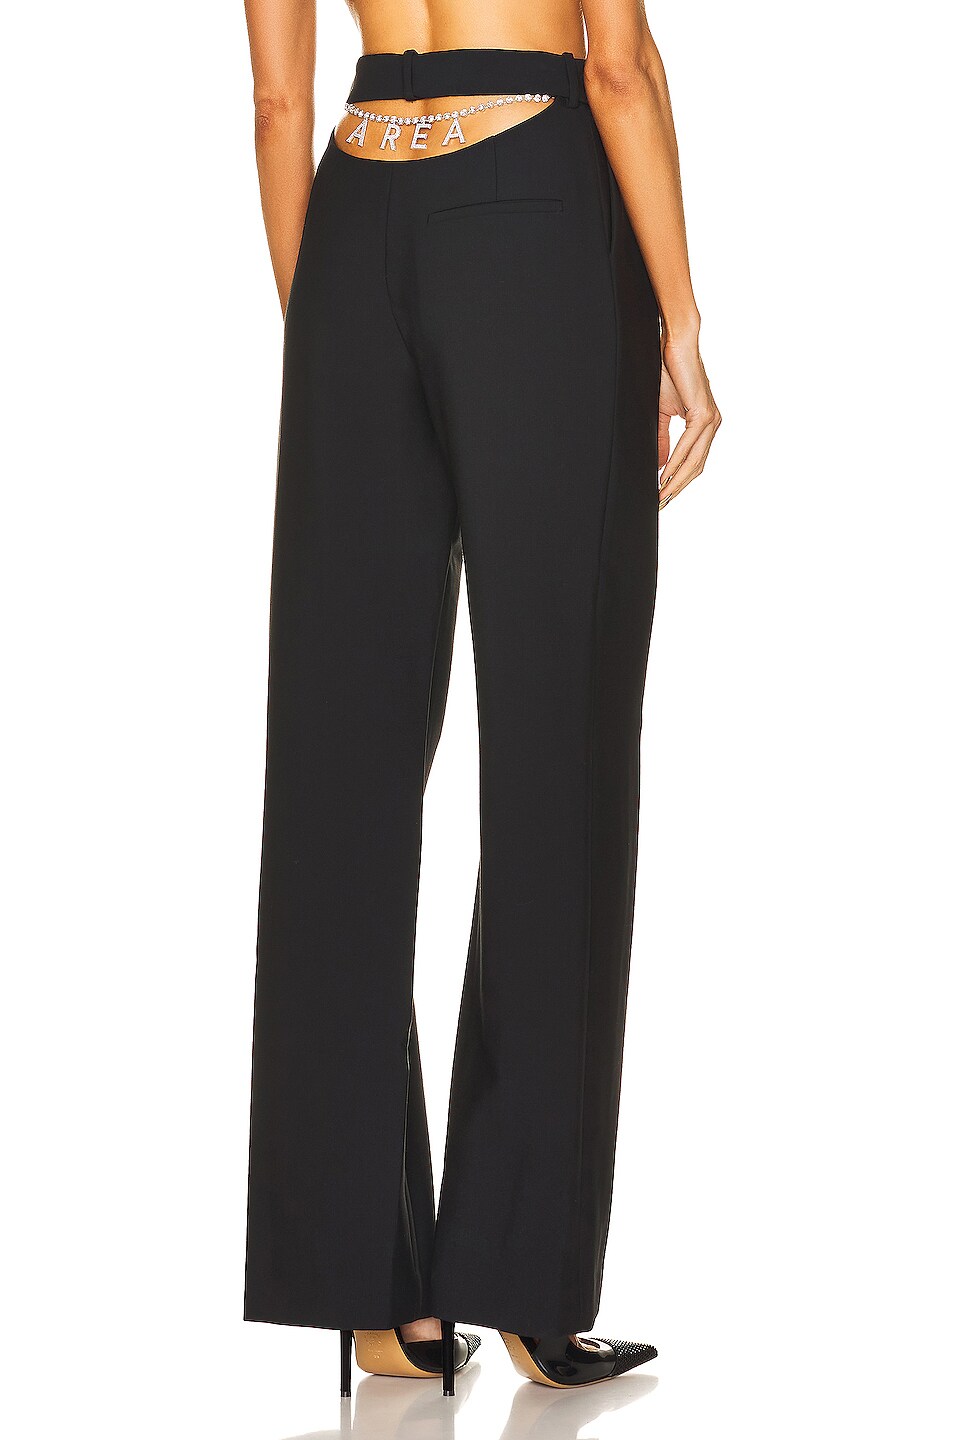 Image 1 of AREA 'Area' Nameplate Wide-Leg Trouser in Black